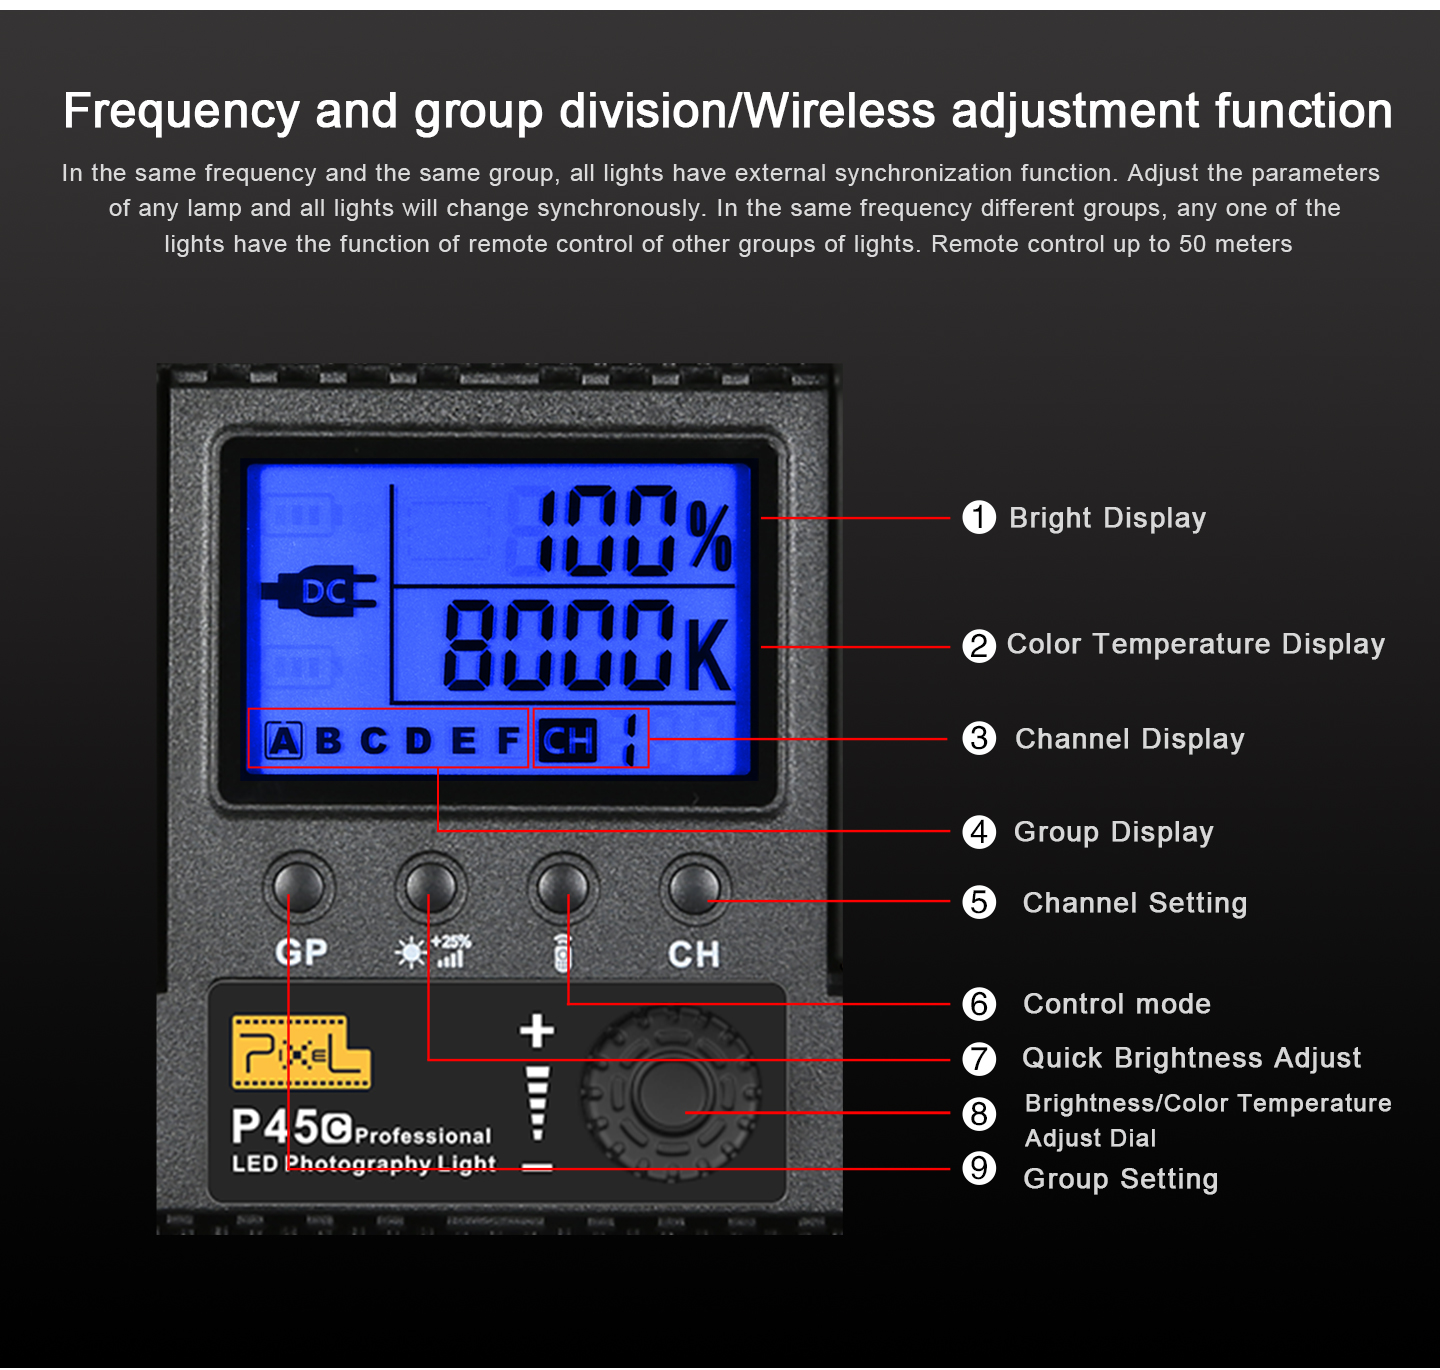 Frequency and group division/Wireless adjustment function